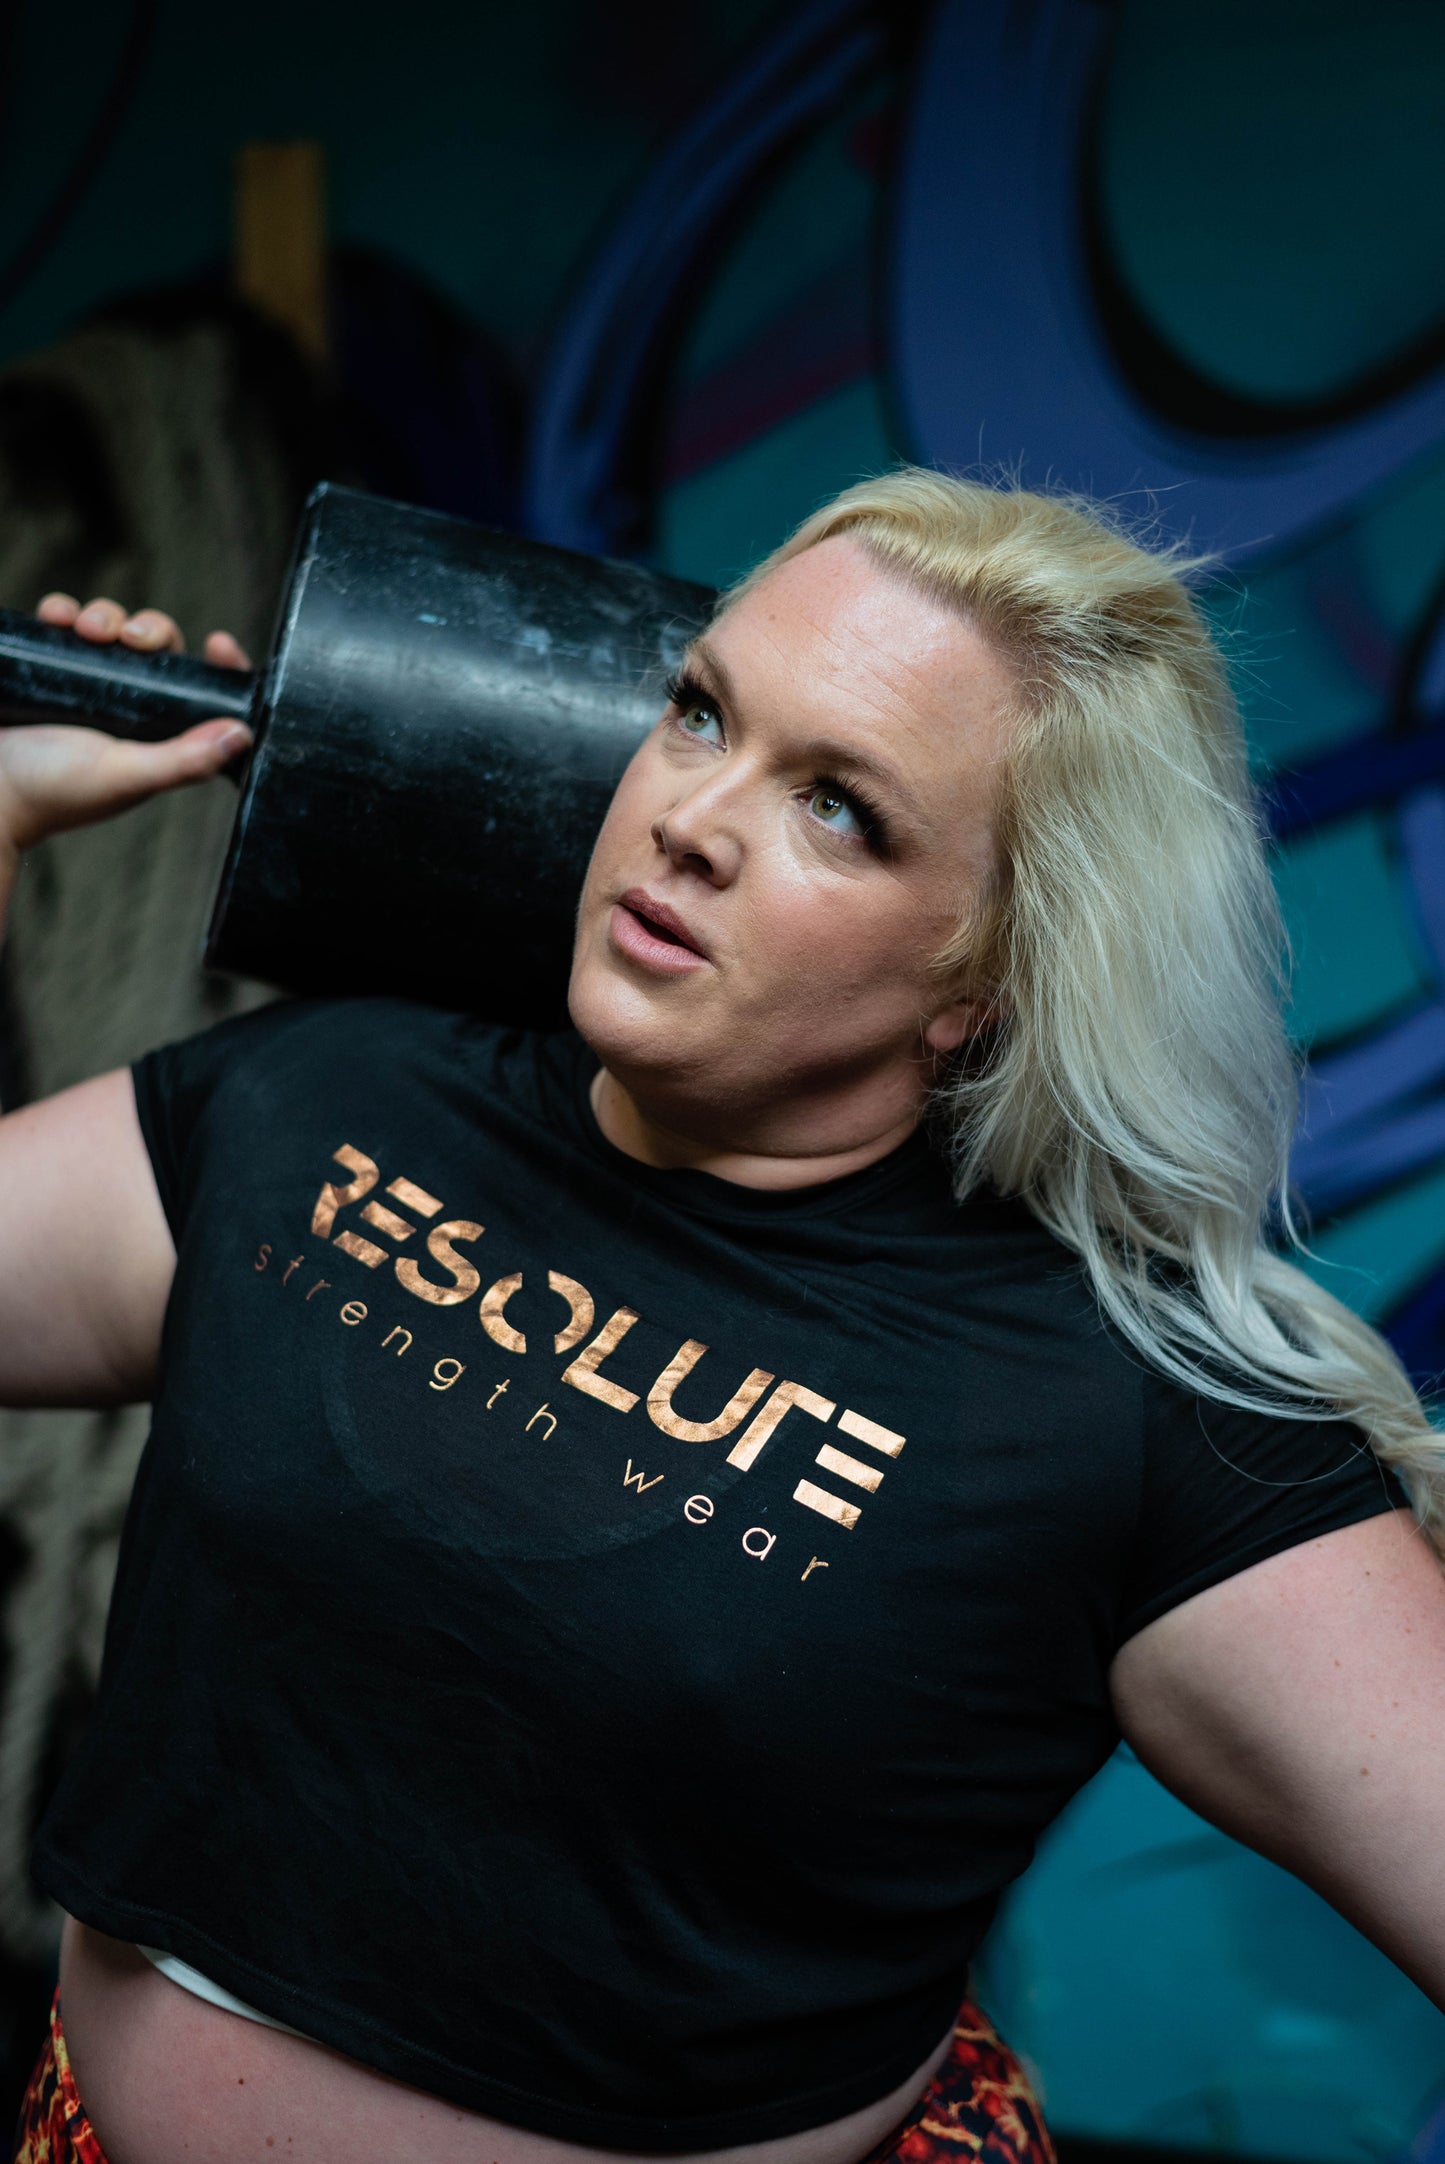 The Classic - Cropped Curvy Tshirt - Resolute Strength Wear